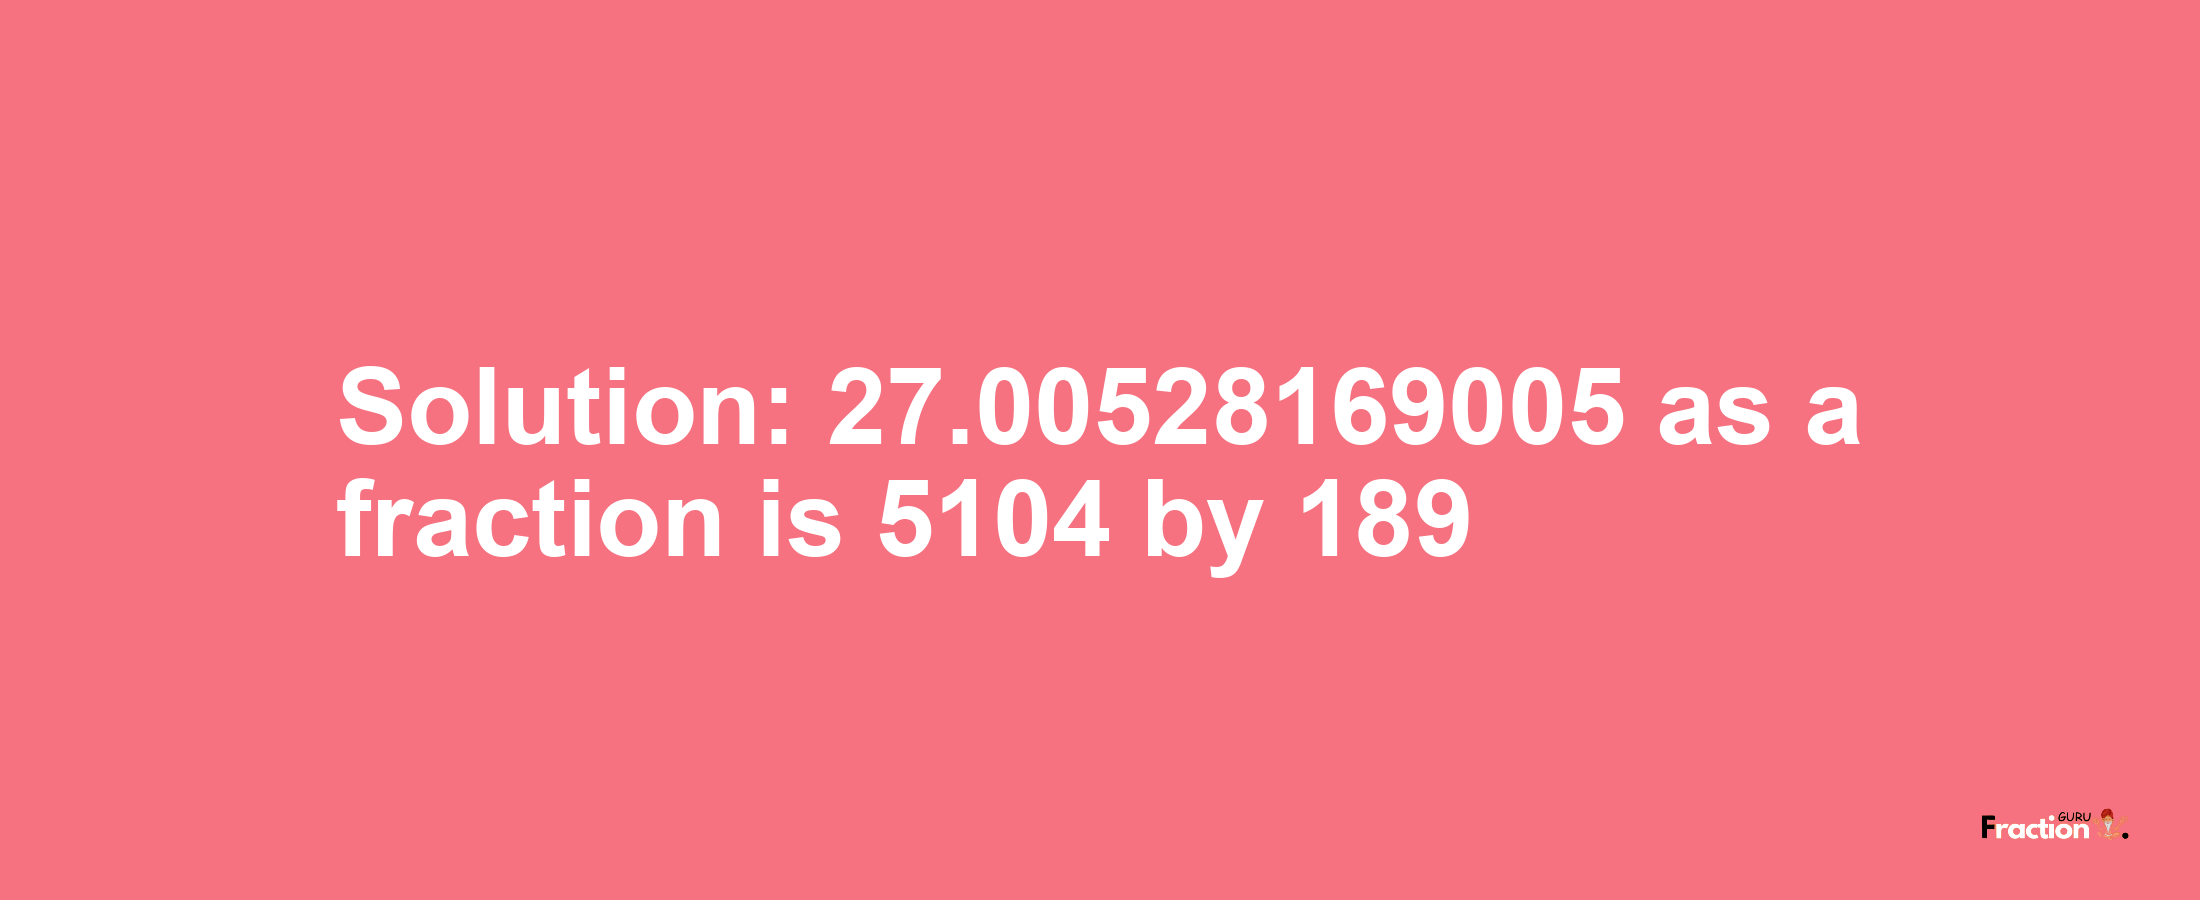 Solution:27.00528169005 as a fraction is 5104/189